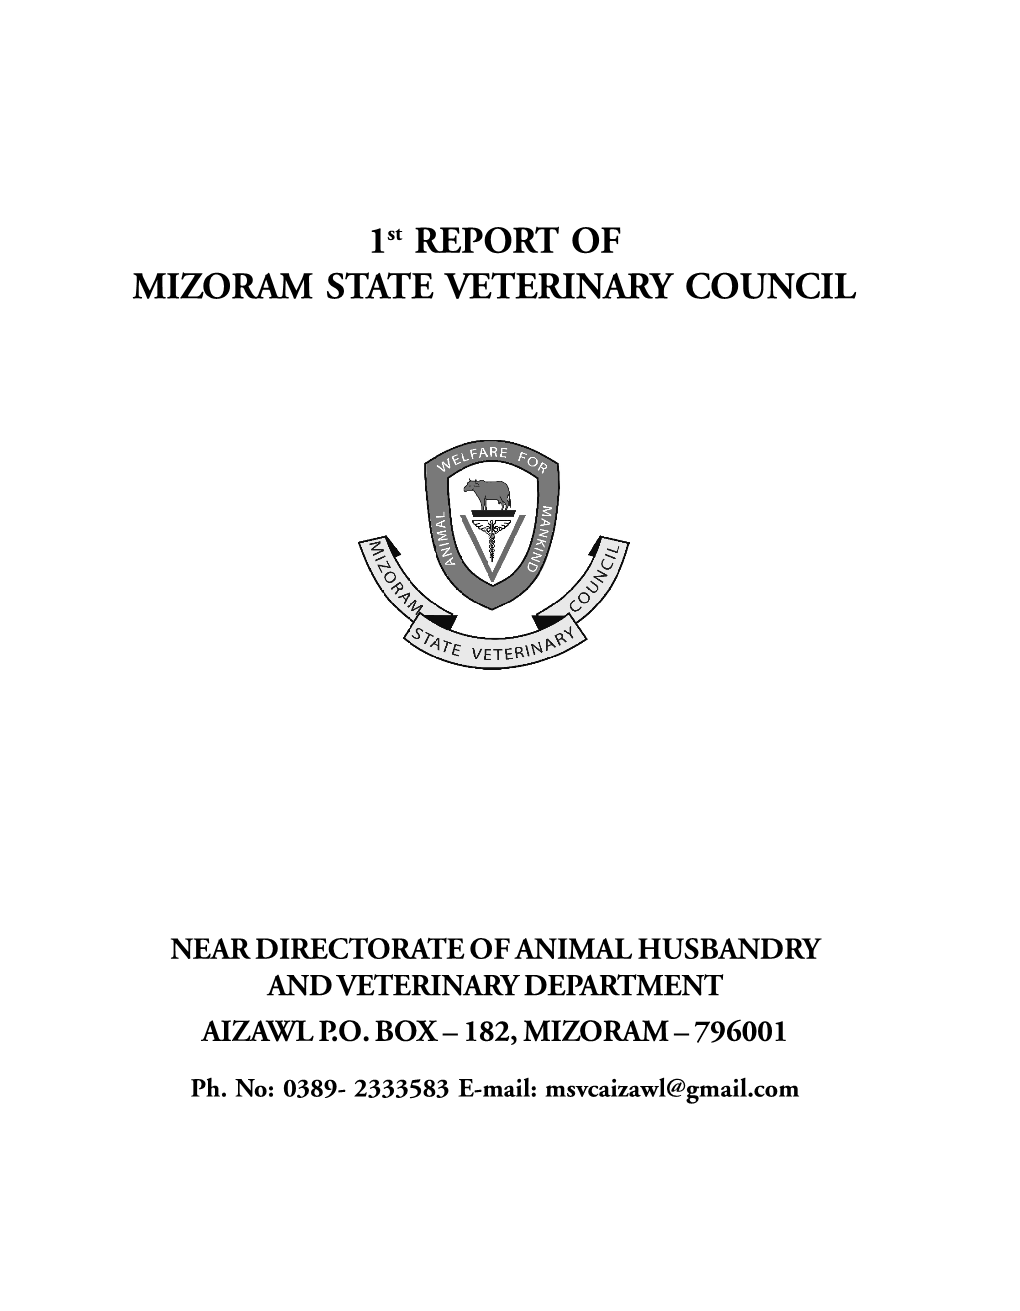 1St REPORT of MIZORAM STATE VETERINARY COUNCIL